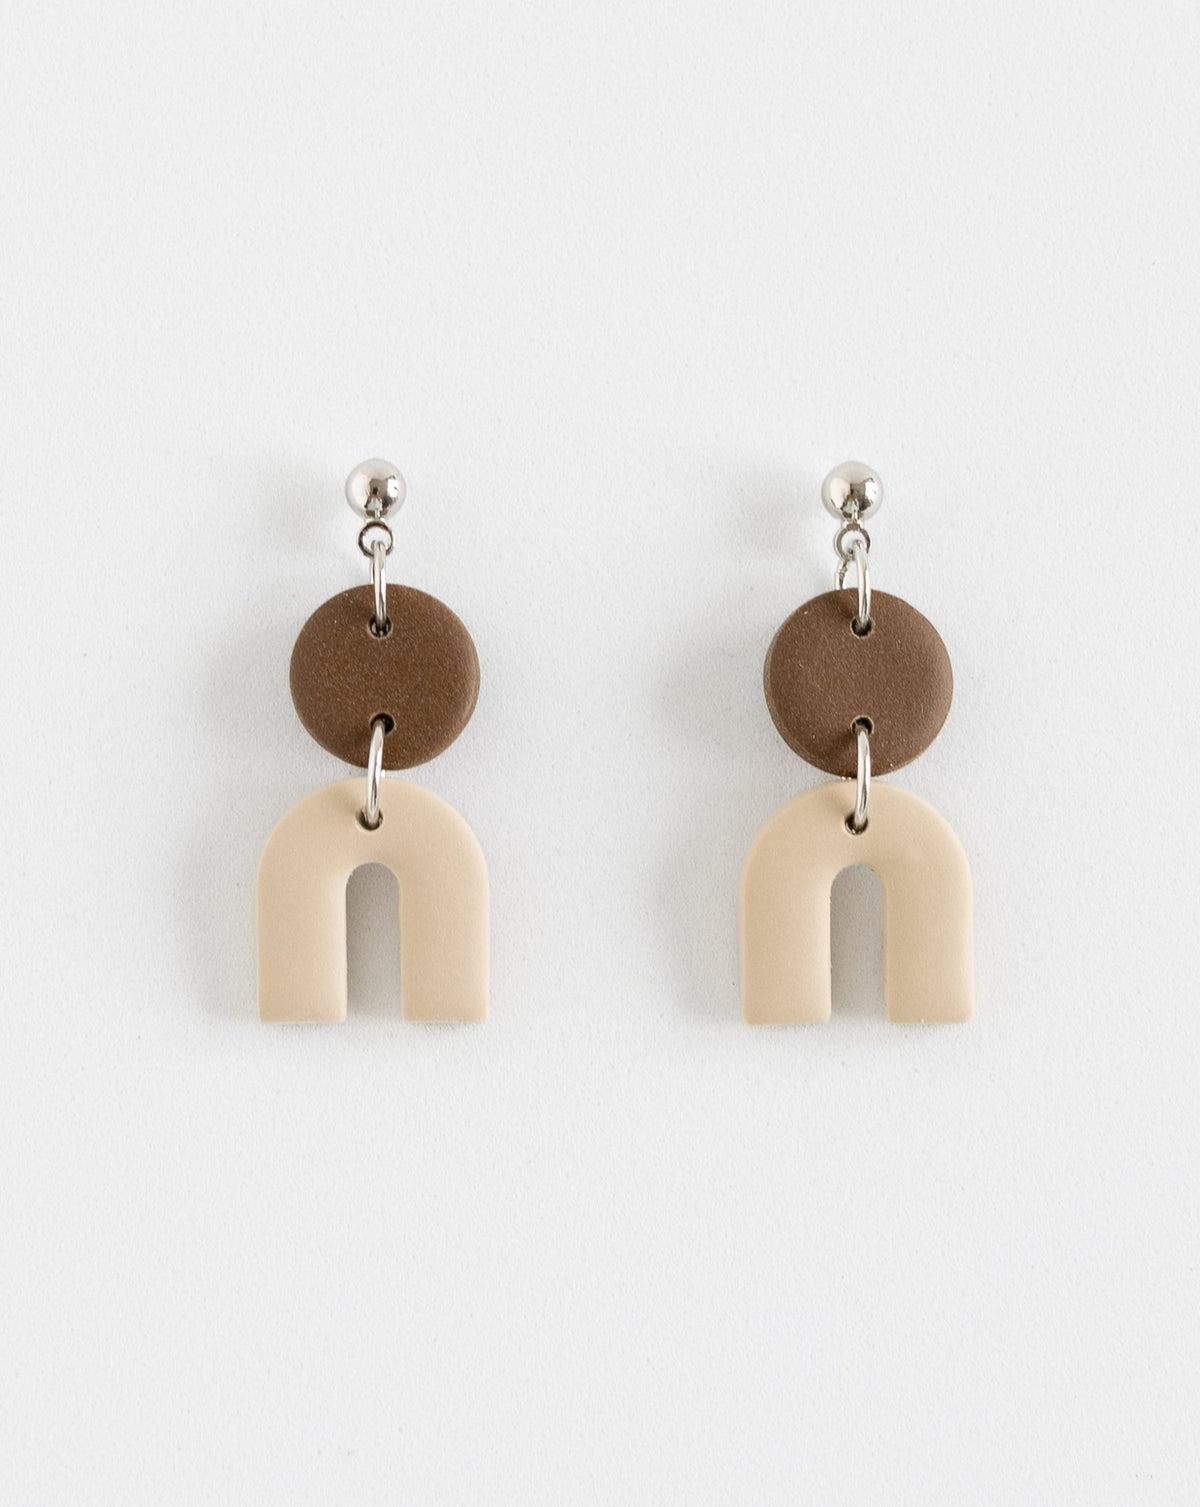 Tiny Arch earrings in two part of brown and beige clay parts with silver Ball studs, front view.